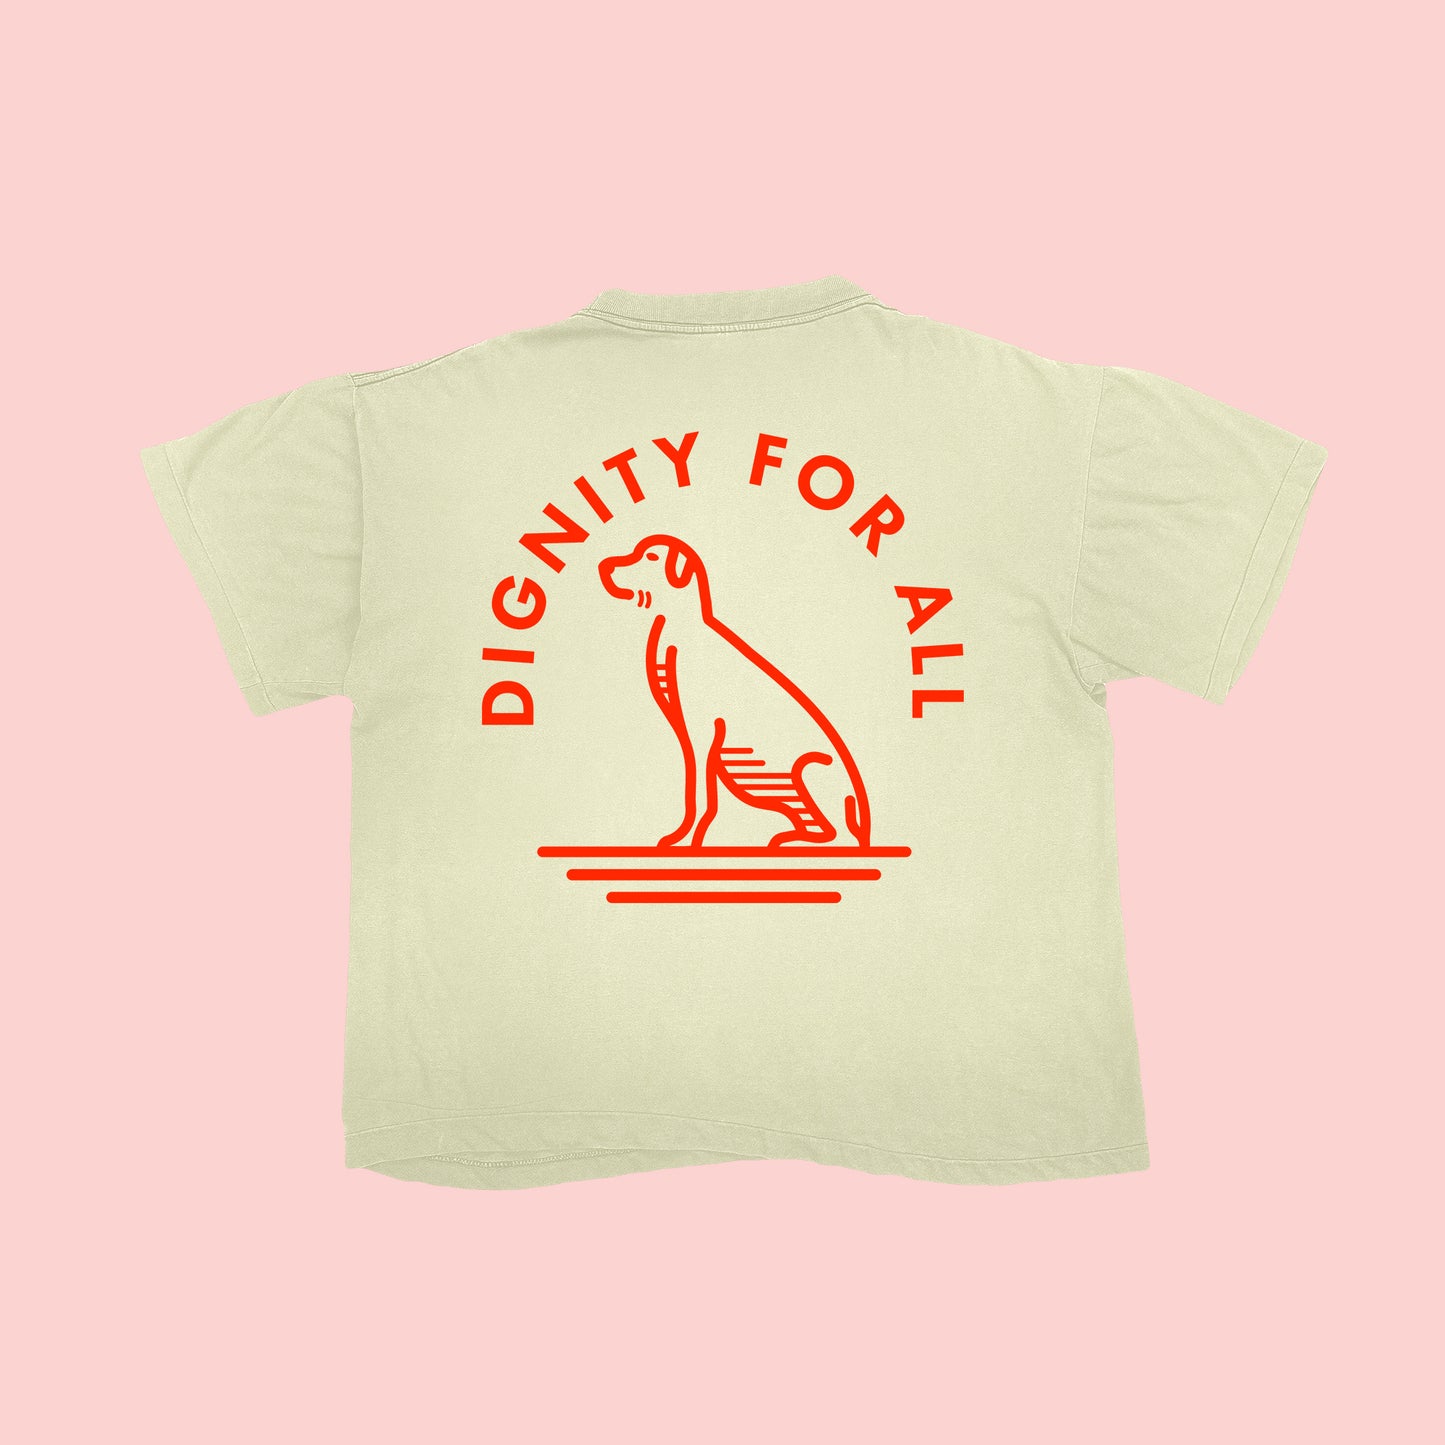 Dignity For All T (Orange)